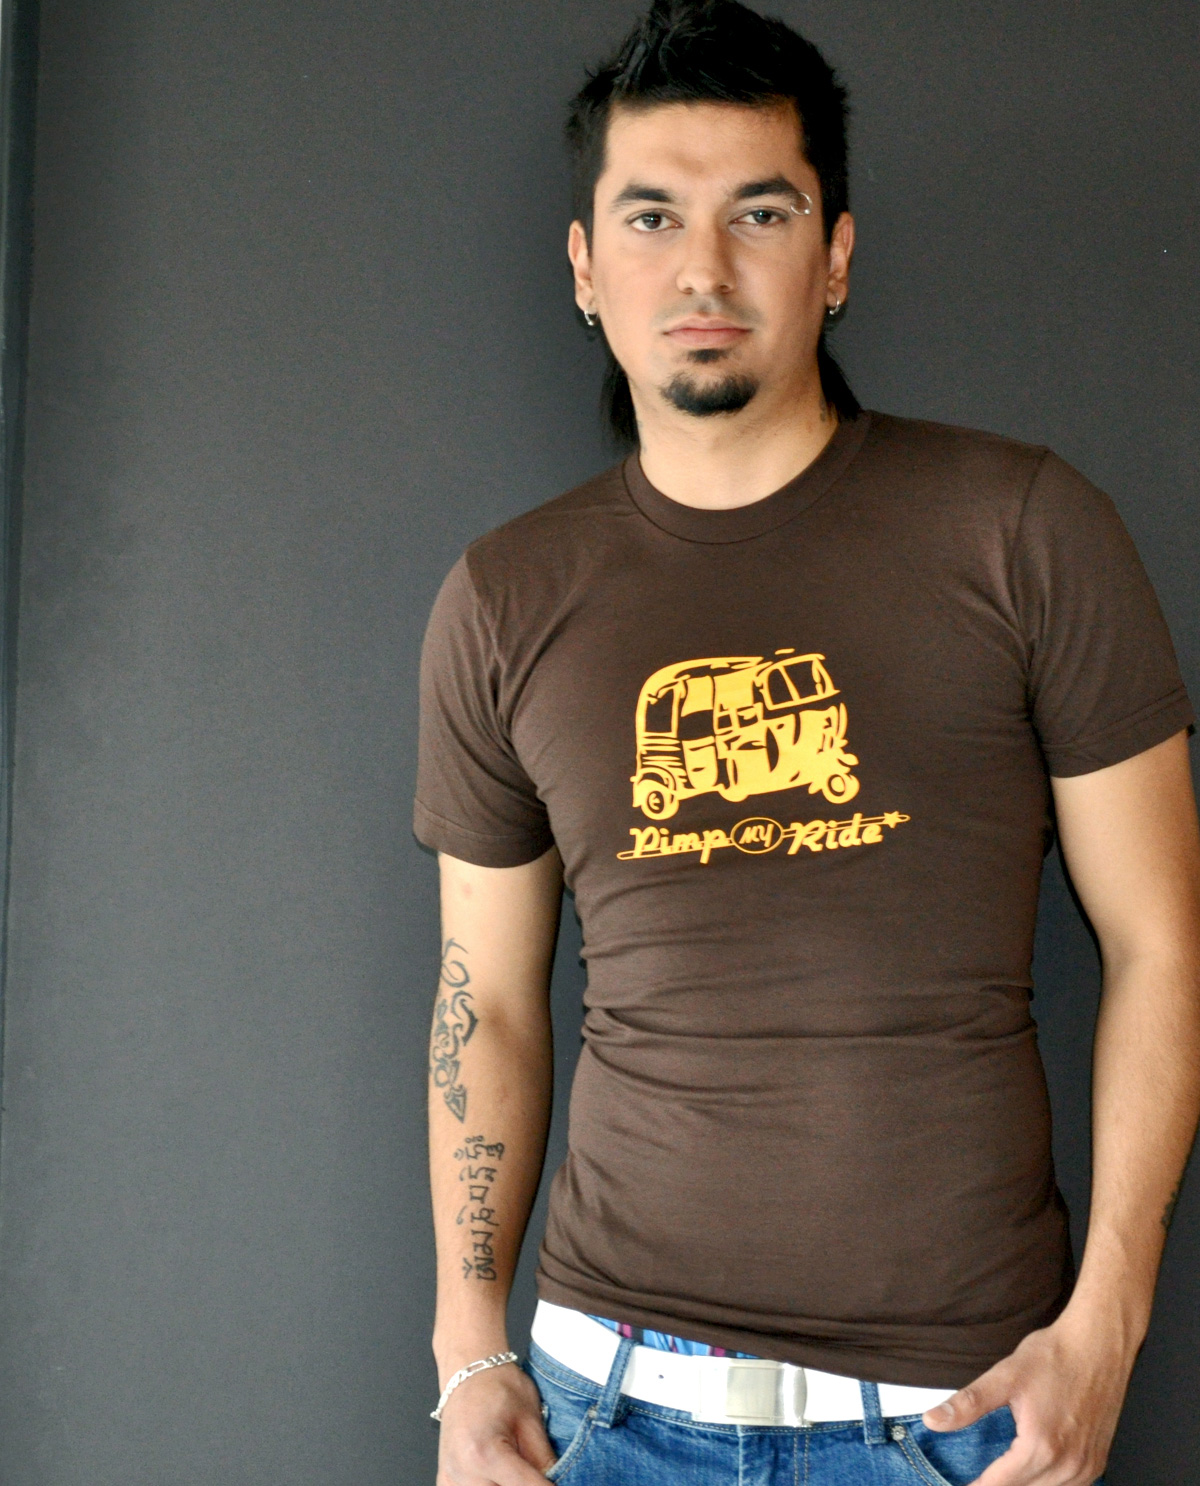 South Asian Male Model wearing American Apparel Jersey T shirt with South Asian themed graphic design on front.